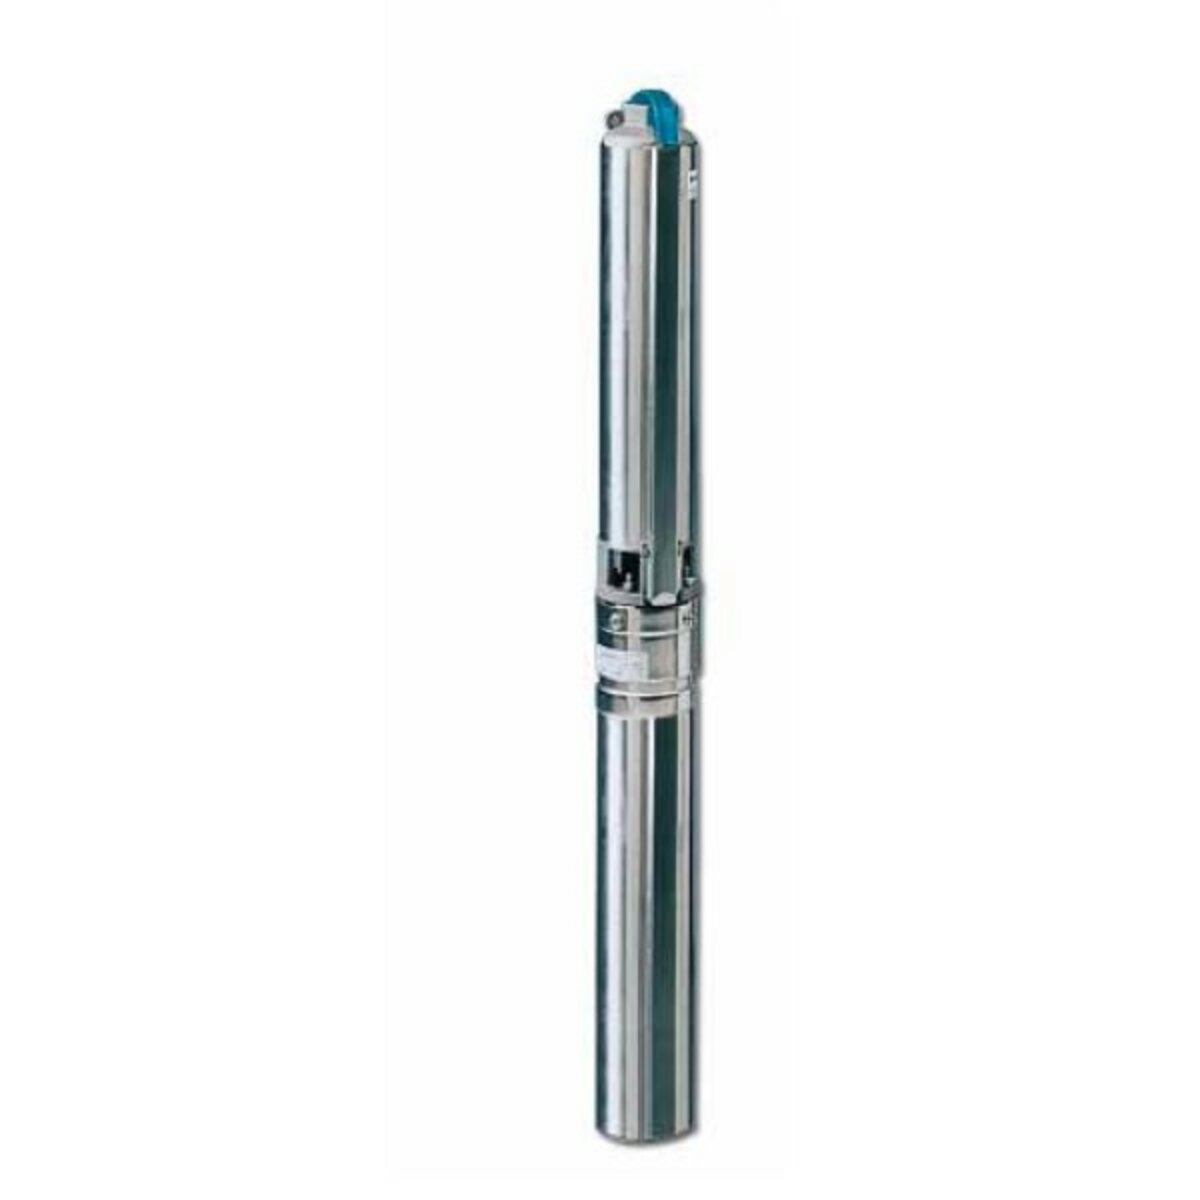 Lowara-Xylem submersible pump for single-phase wells hp 1 kW 0.75 GS series 4